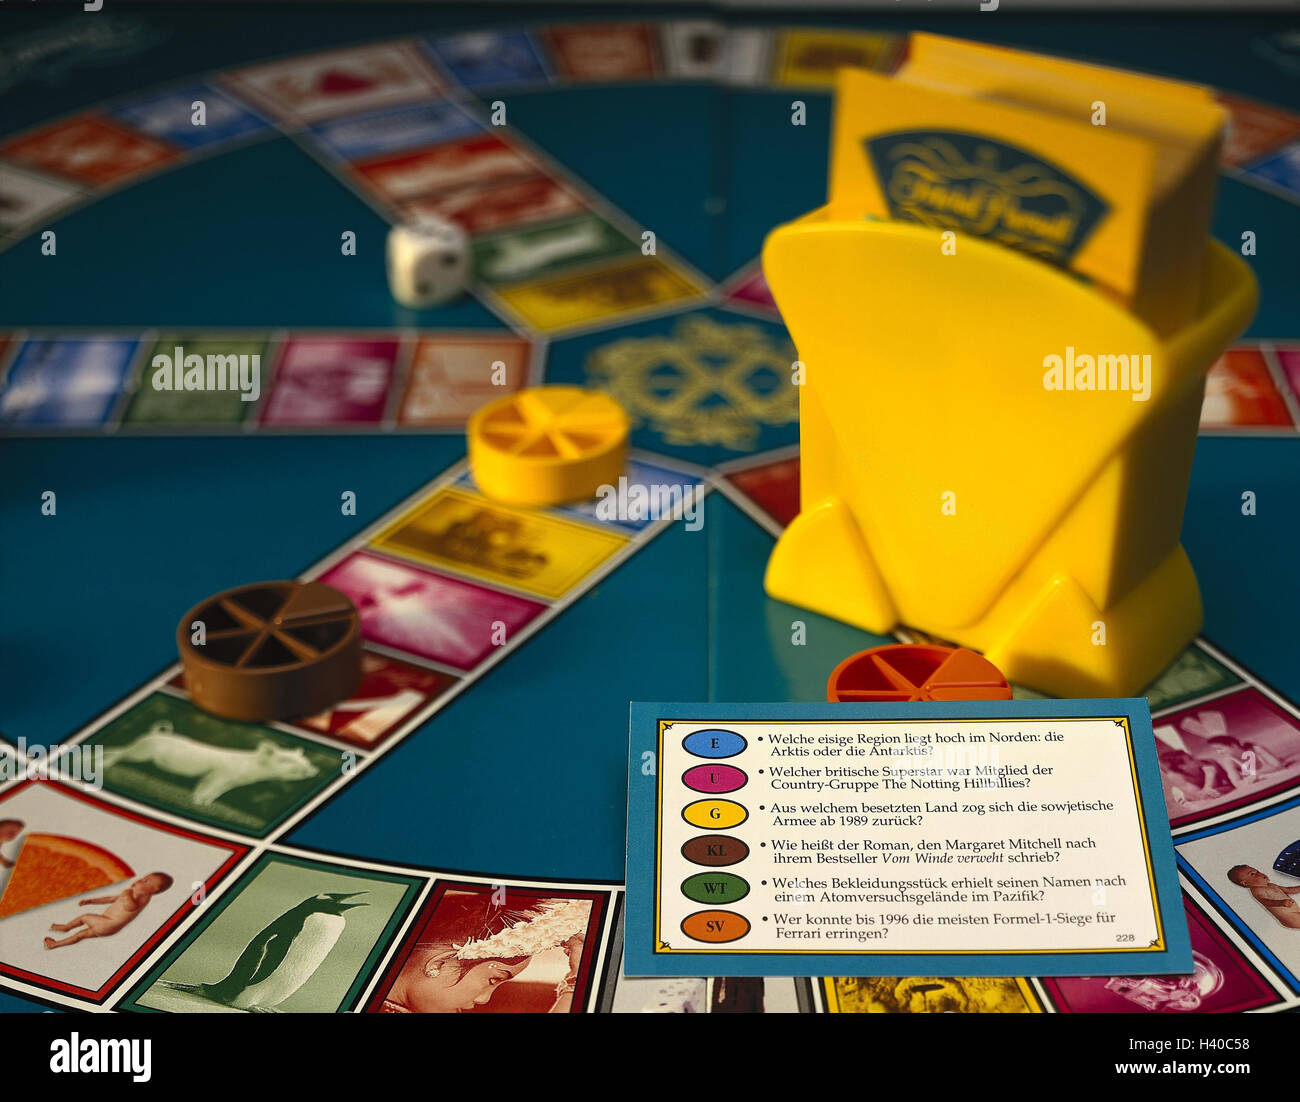 Parlour game, Trivially Pursuit, detail, entertainment game, game, interrogative response game, knowledge game, general knowledge, knowledge, board game, program, pitch, board, gaming pieces, playing card, questions, playing card holders, product photogra Stock Photo